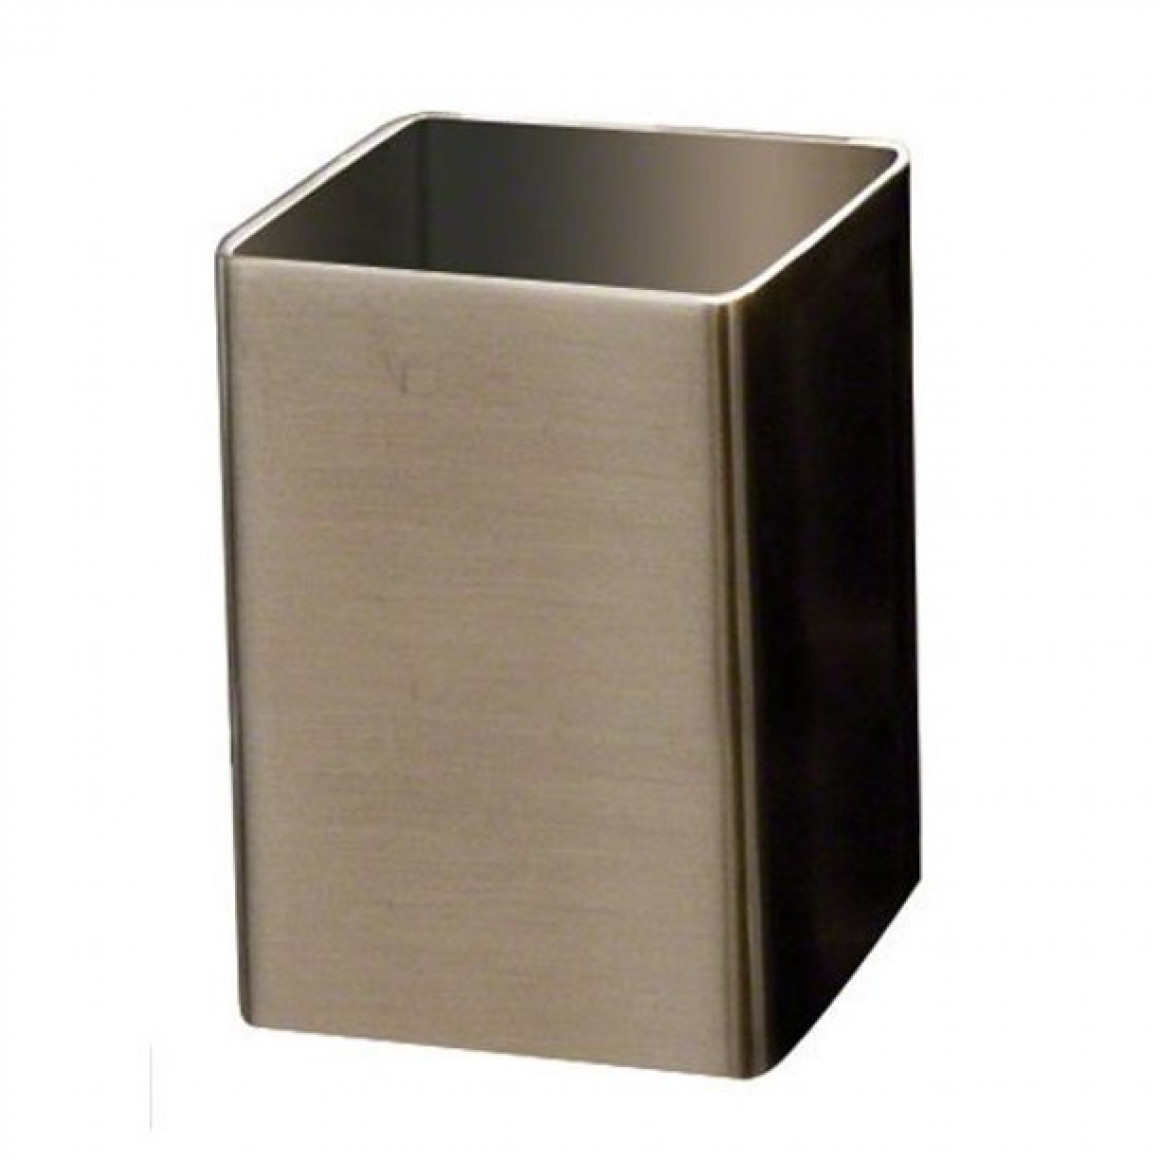 HOLDER, SUGAR PACKET/CUBE, STAINLESS STEEL, SATIN, SQUARE